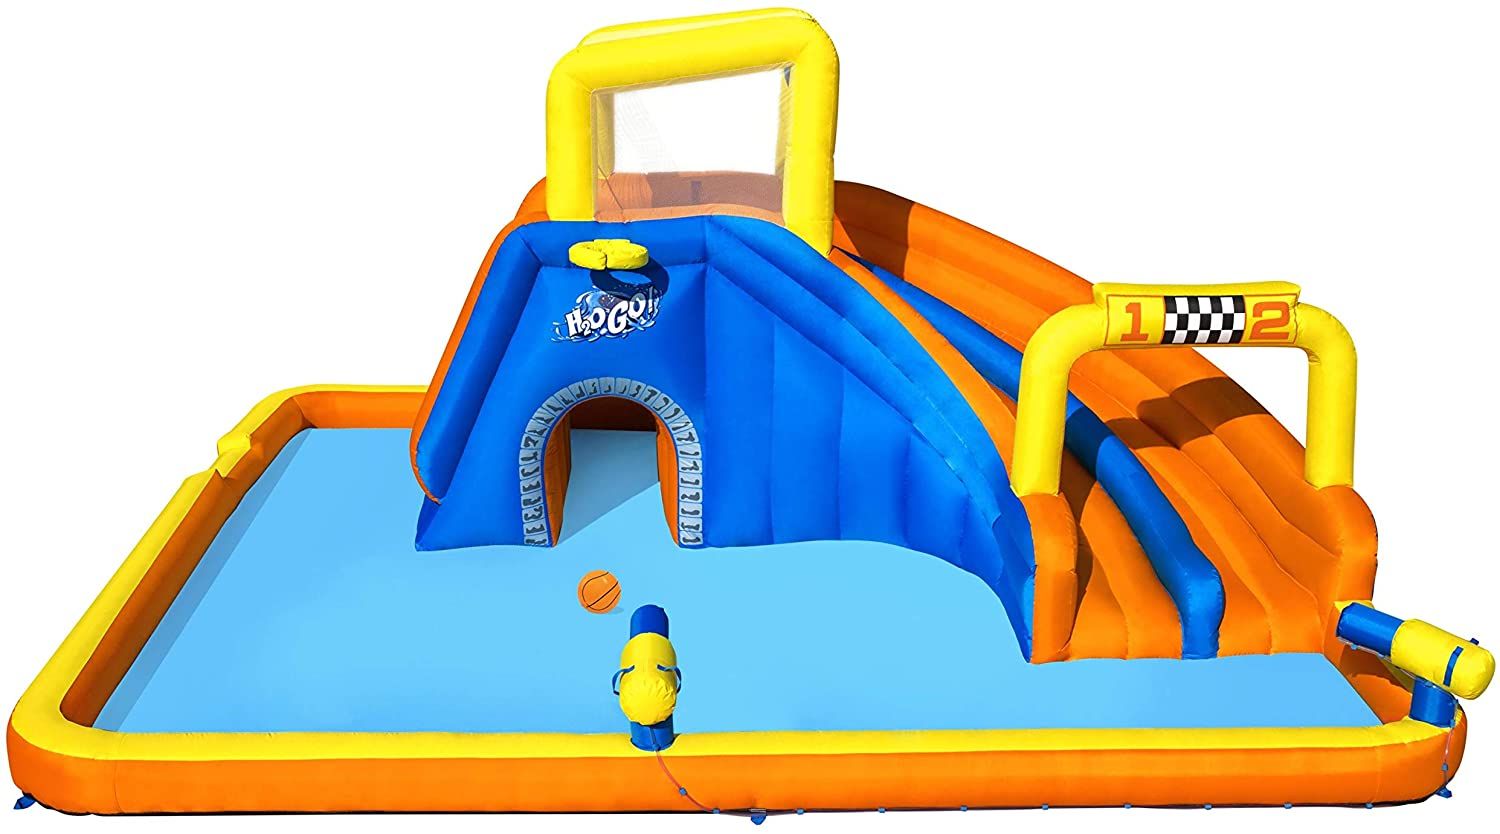 Inflatable play center